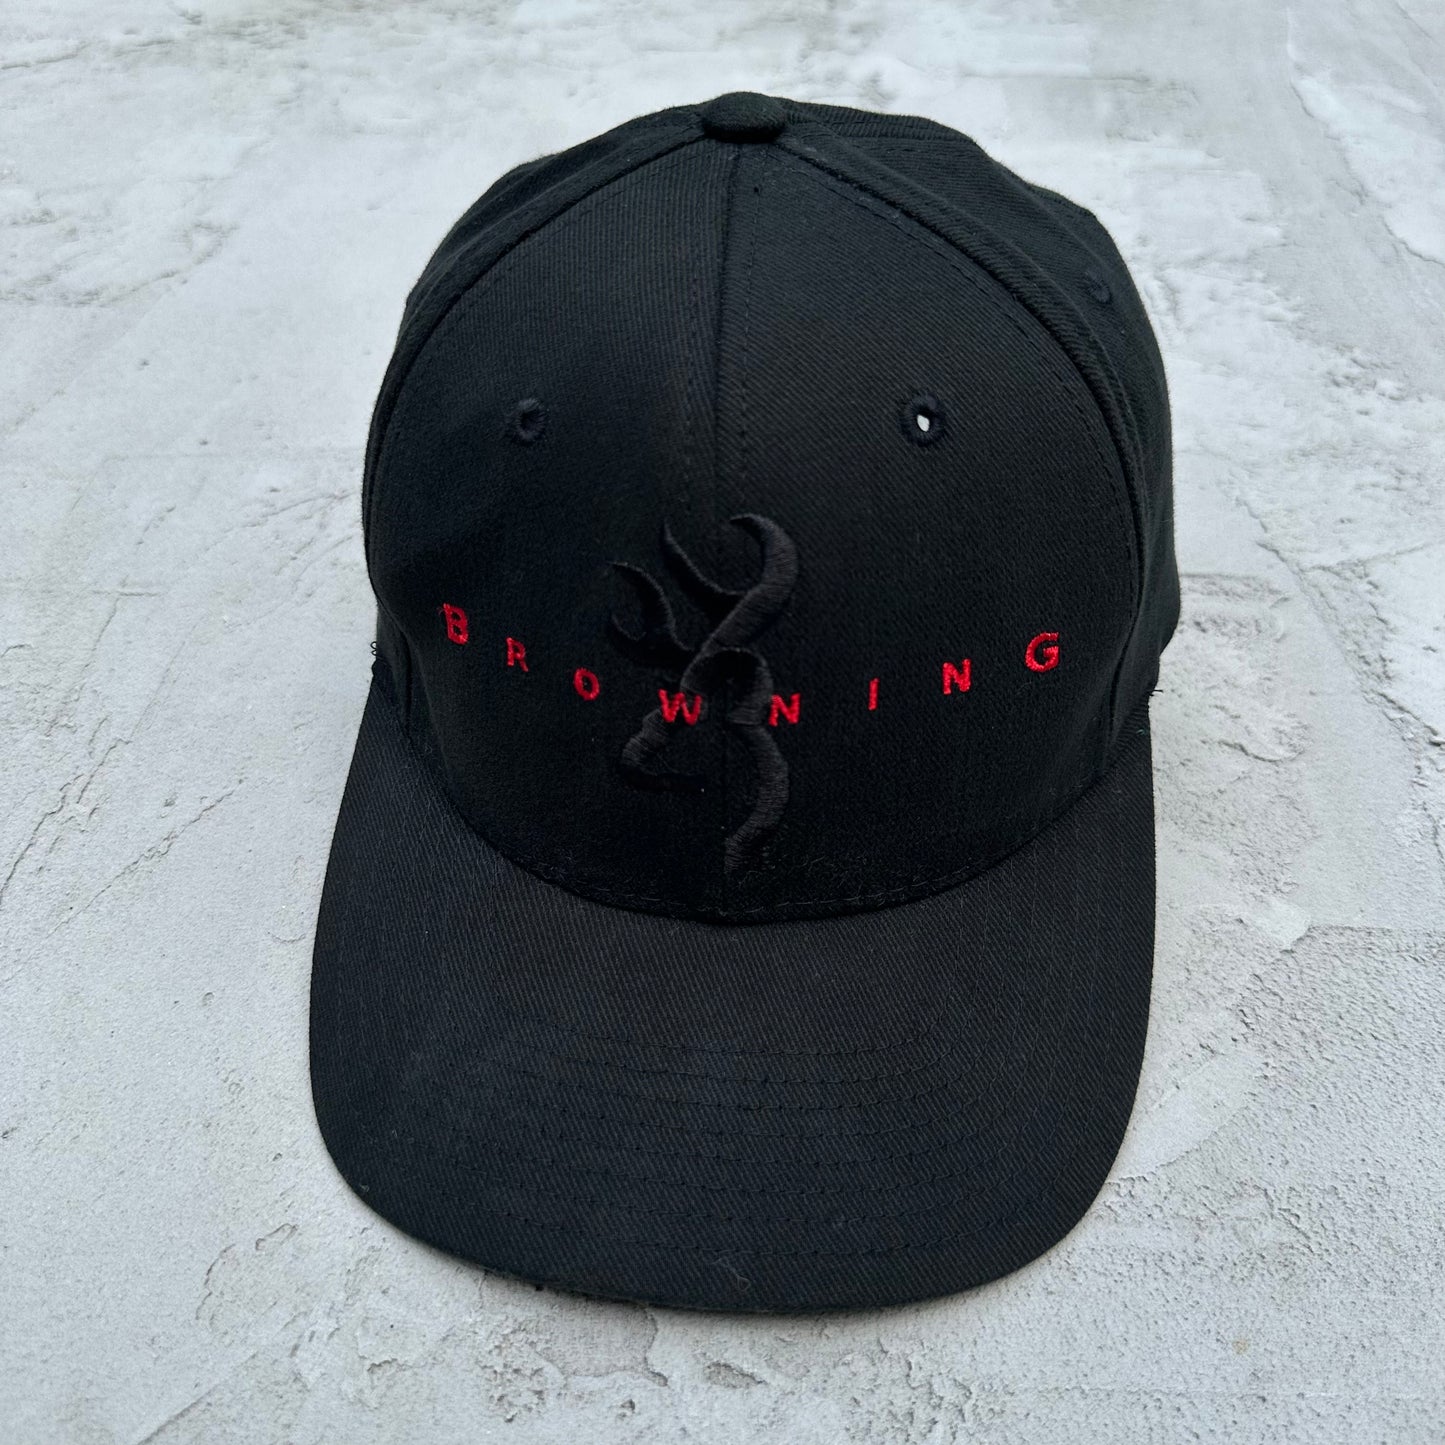 Vintage Browning Hunting Black Red Fitted Hat